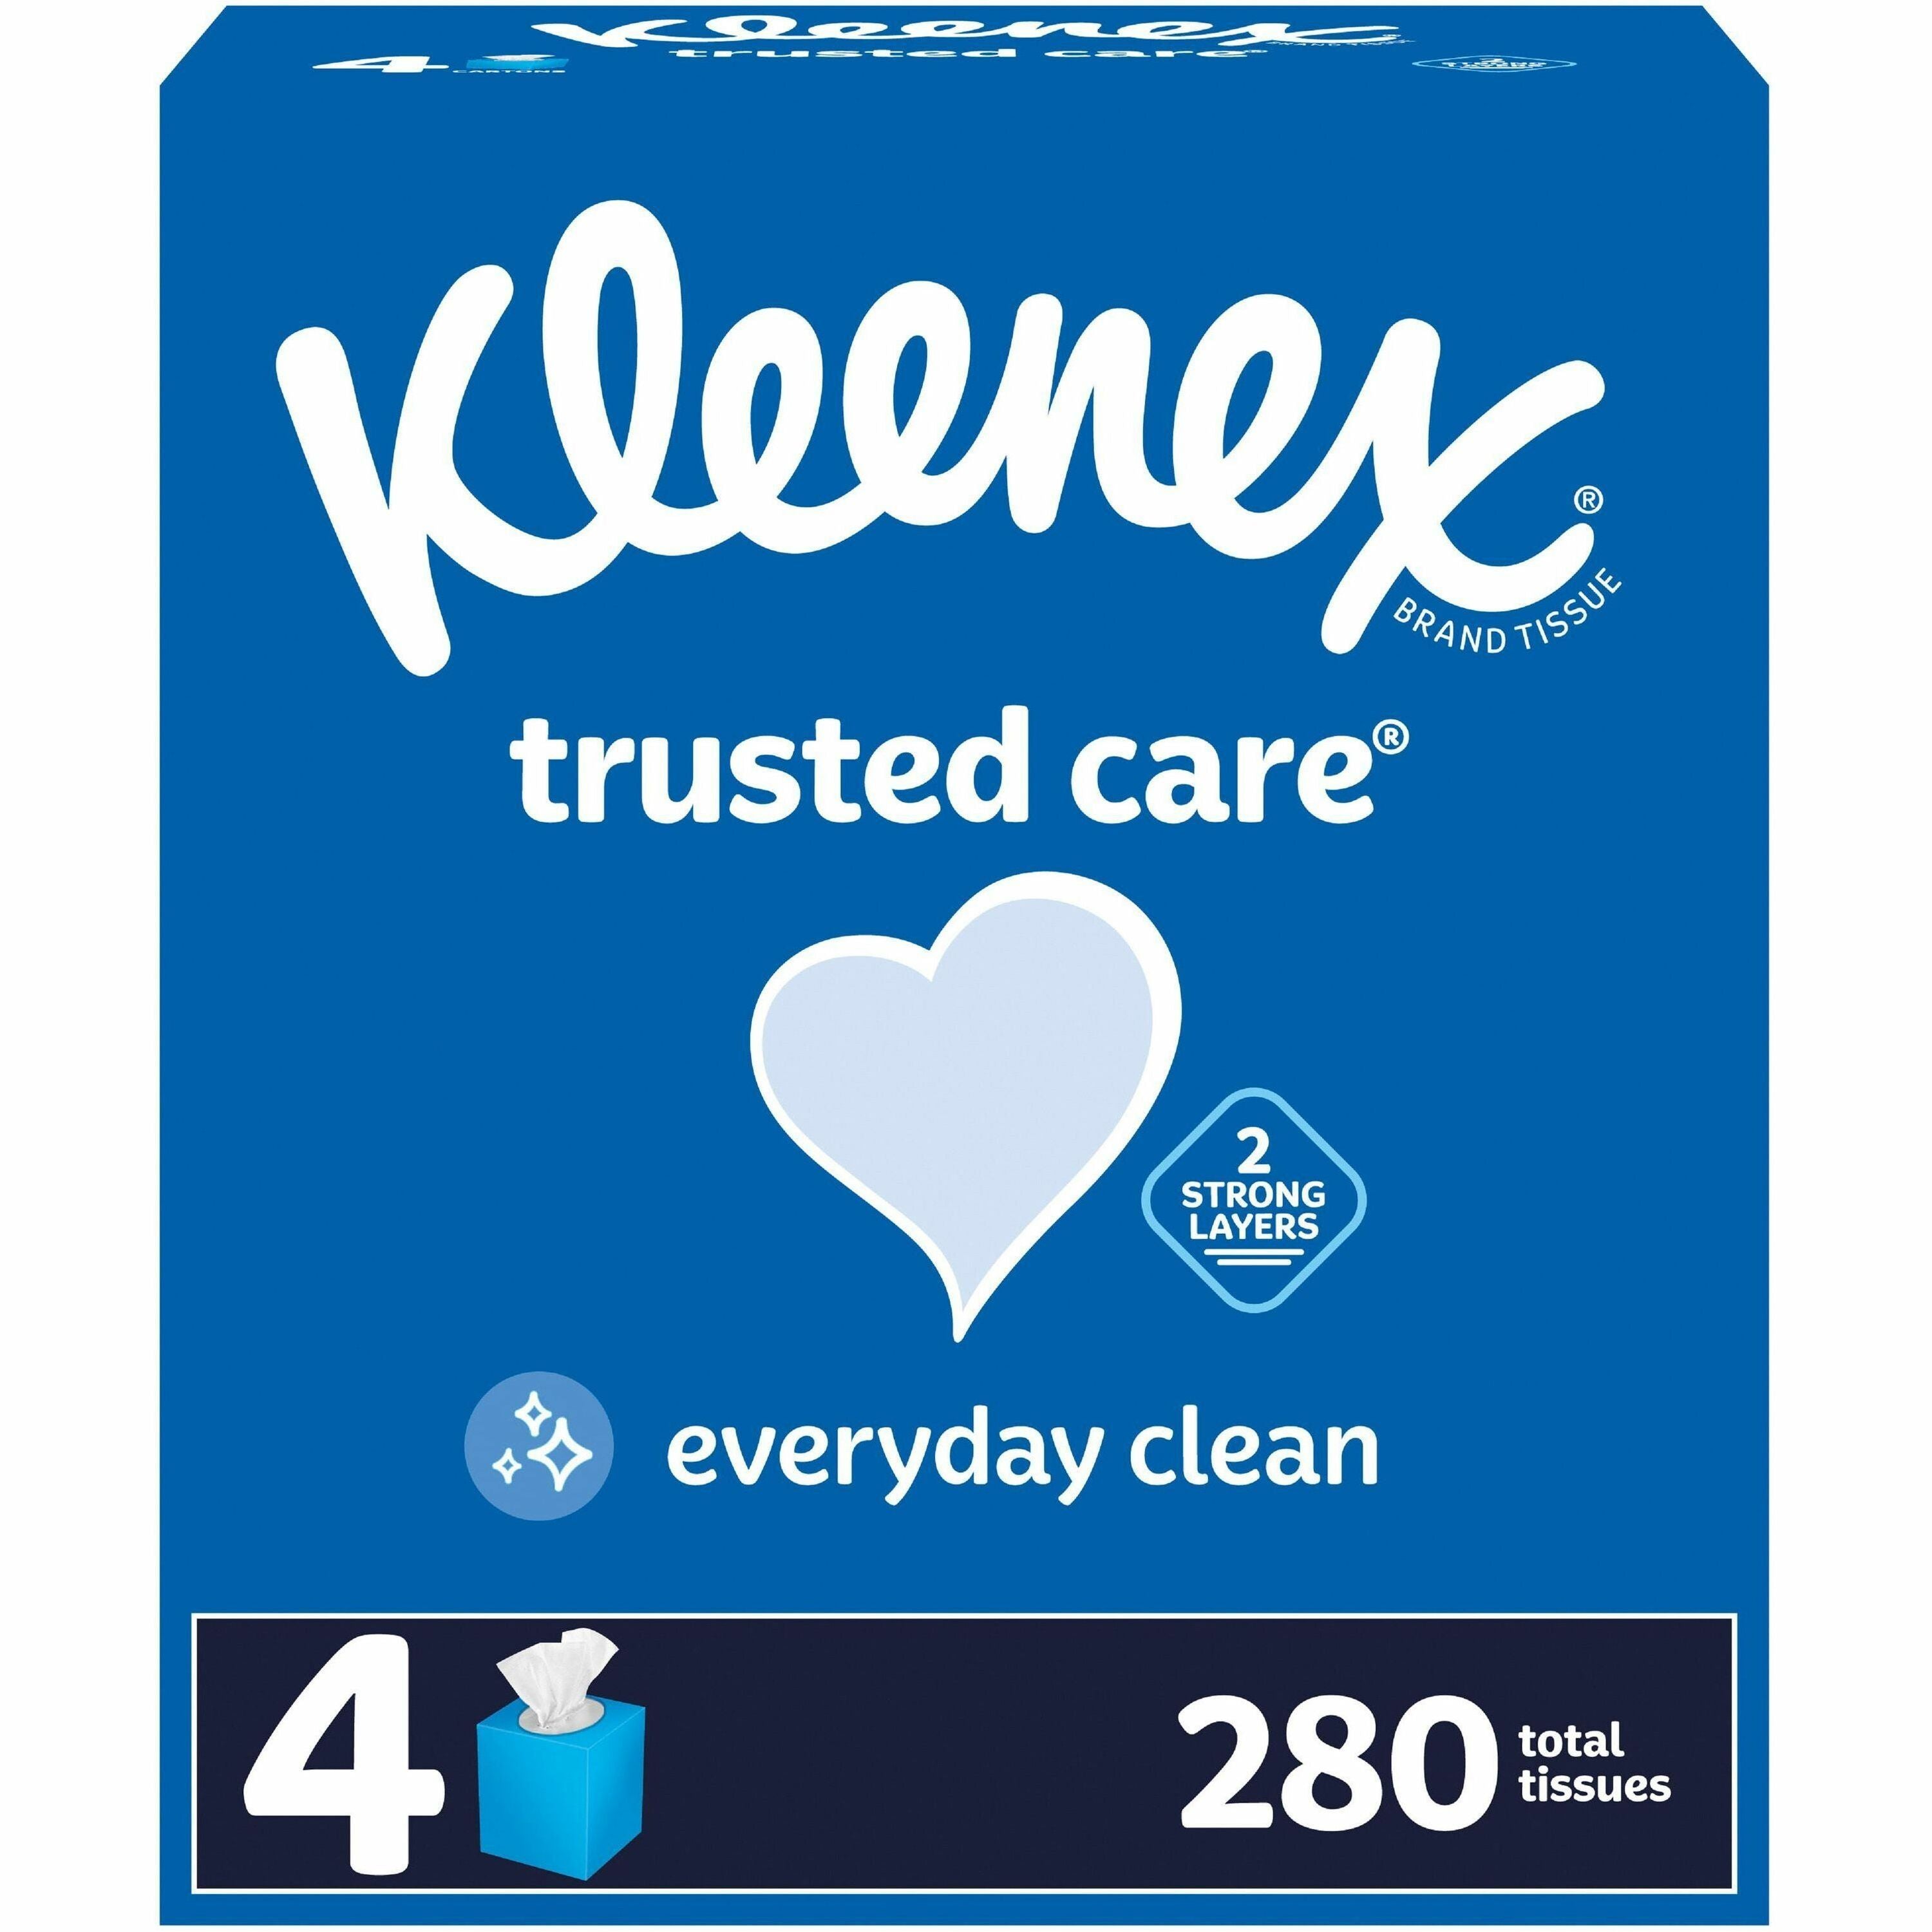 kleenex-trusted-care-tissues-2-ply-820-x-840-white-soft-strong-absorbent-durable-for-home-office-school-70-per-box-12-carton_kcc50184ct - 1